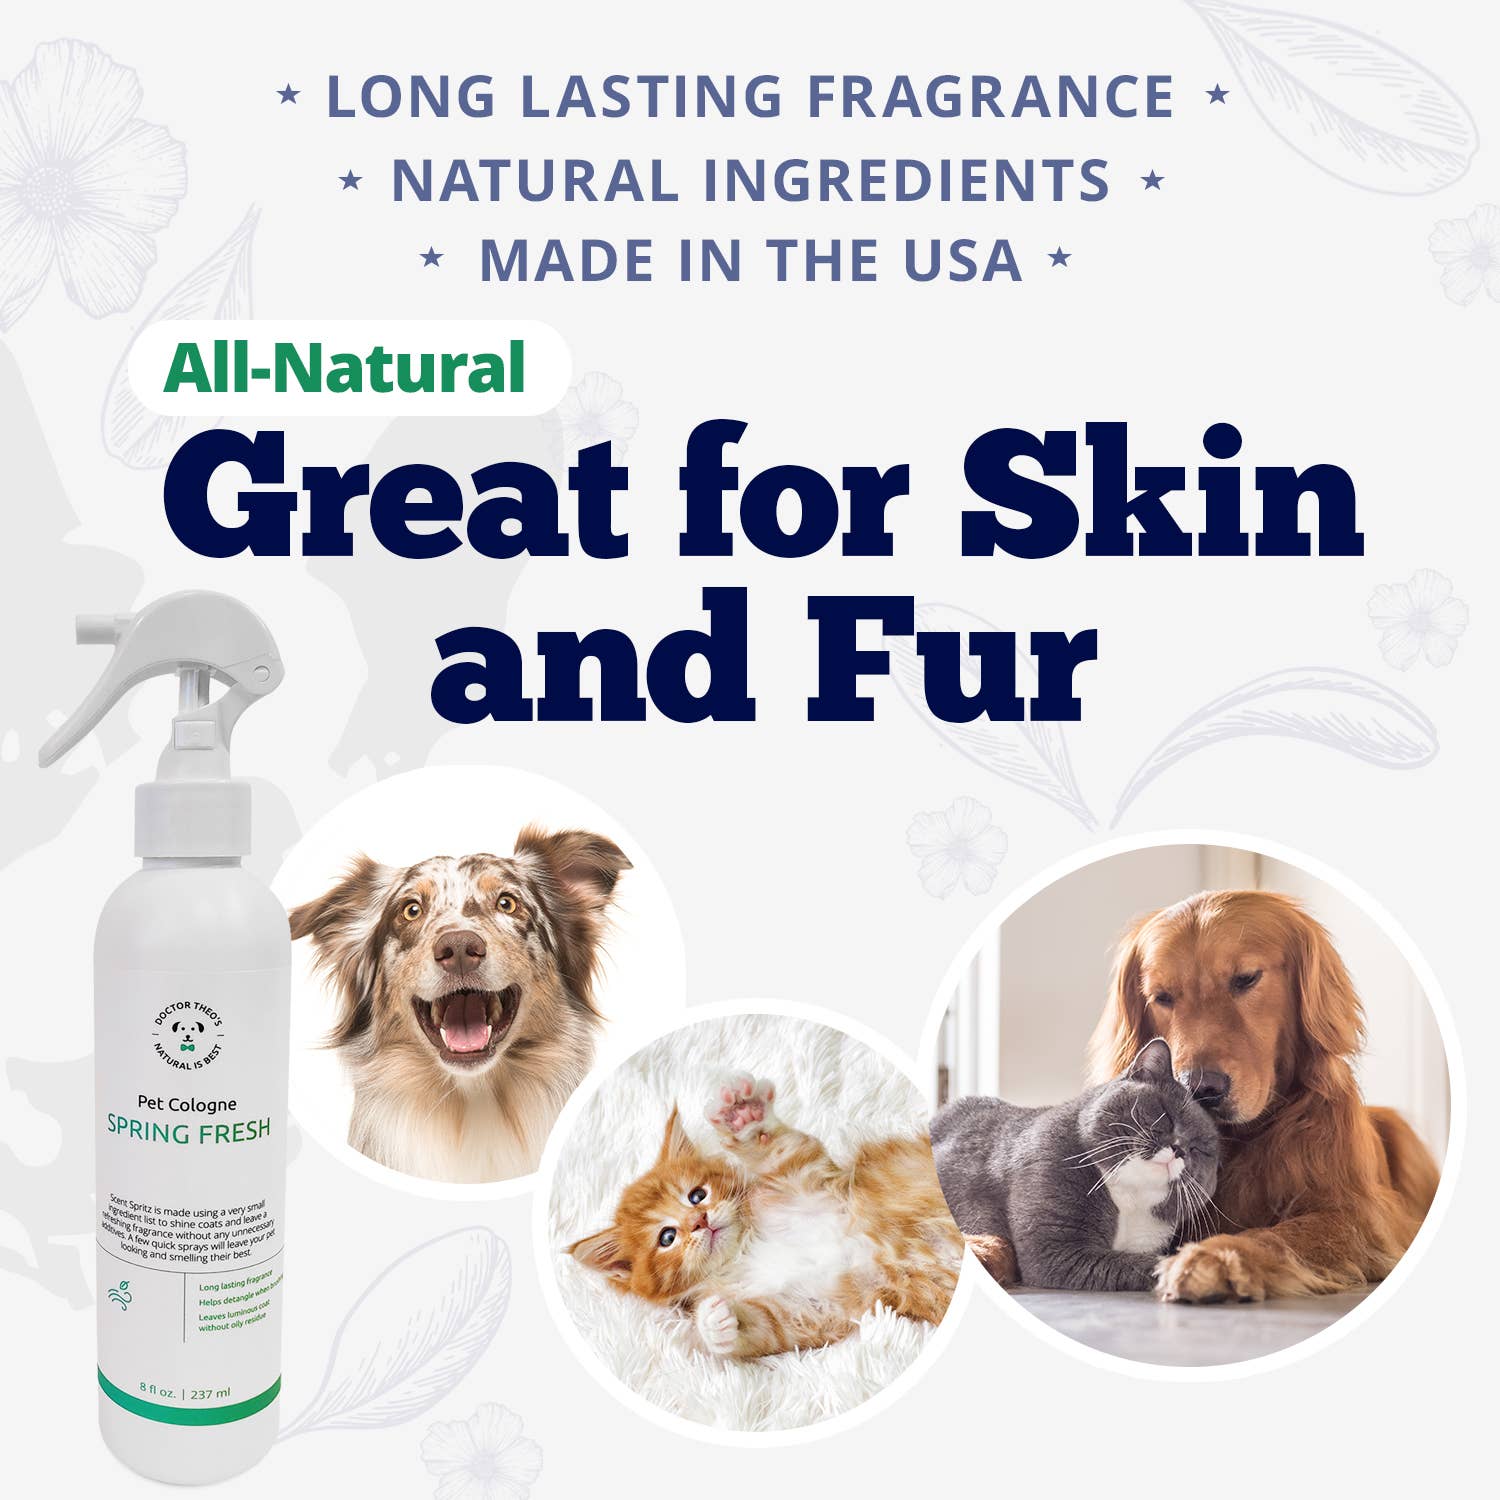 Dr Theos Doggie Deodorant USA MADE - The Pink Pigs, A Compassionate Boutique